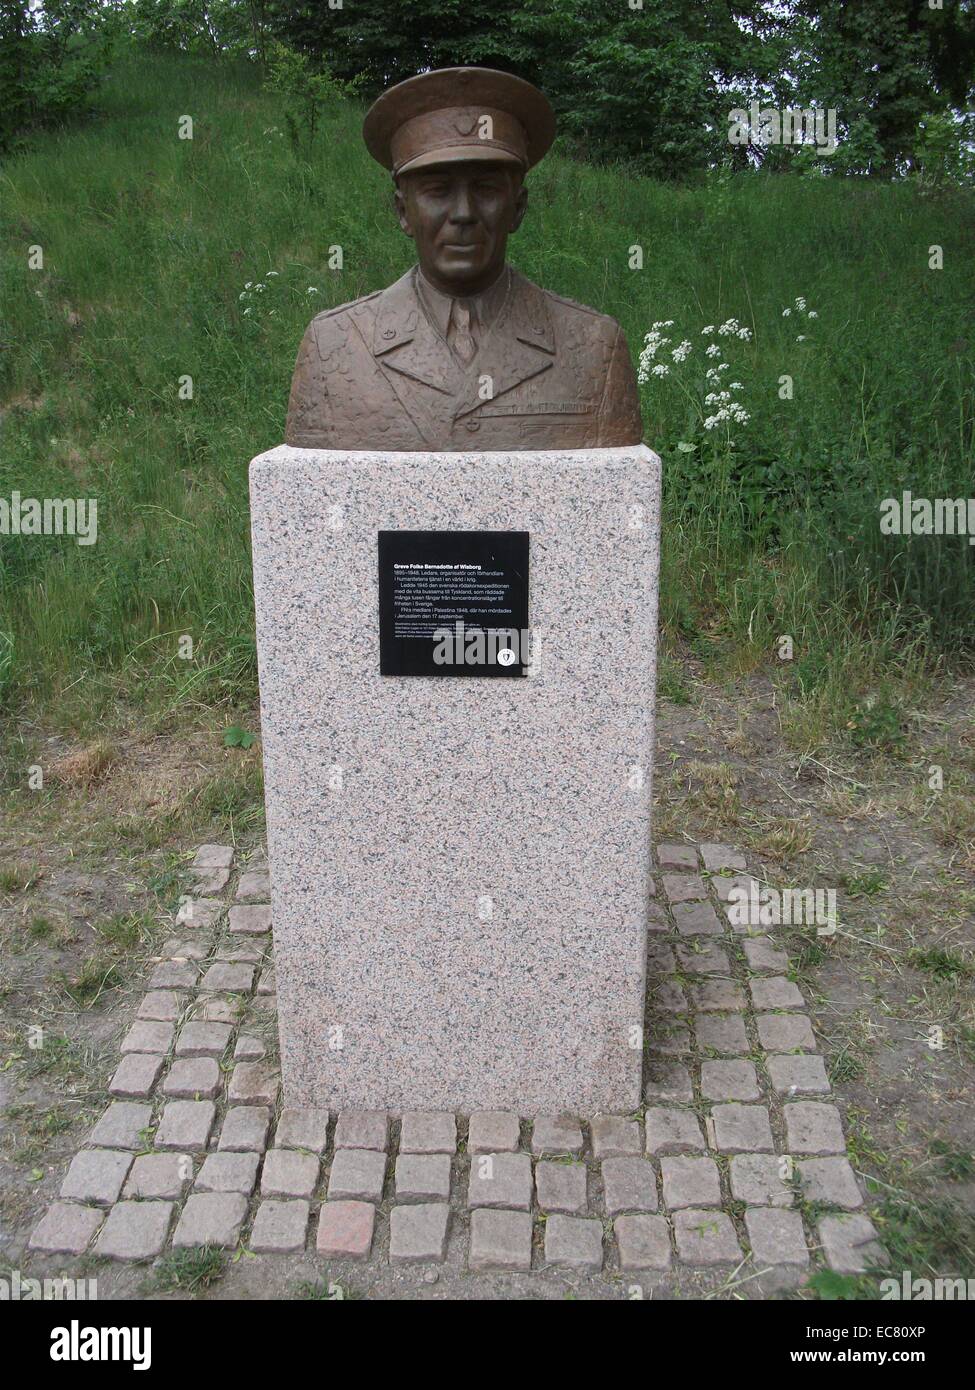 Memorial for Folke Bernadotte, Count of Wisborg (1895 –1948) who was a Swedish diplomat and nobleman noted for his negotiation of the release of about 31,000 prisoners from German concentration camps during World War II. He was assassinated in 1948 by the militant Zionist group Lehi. Stock Photo